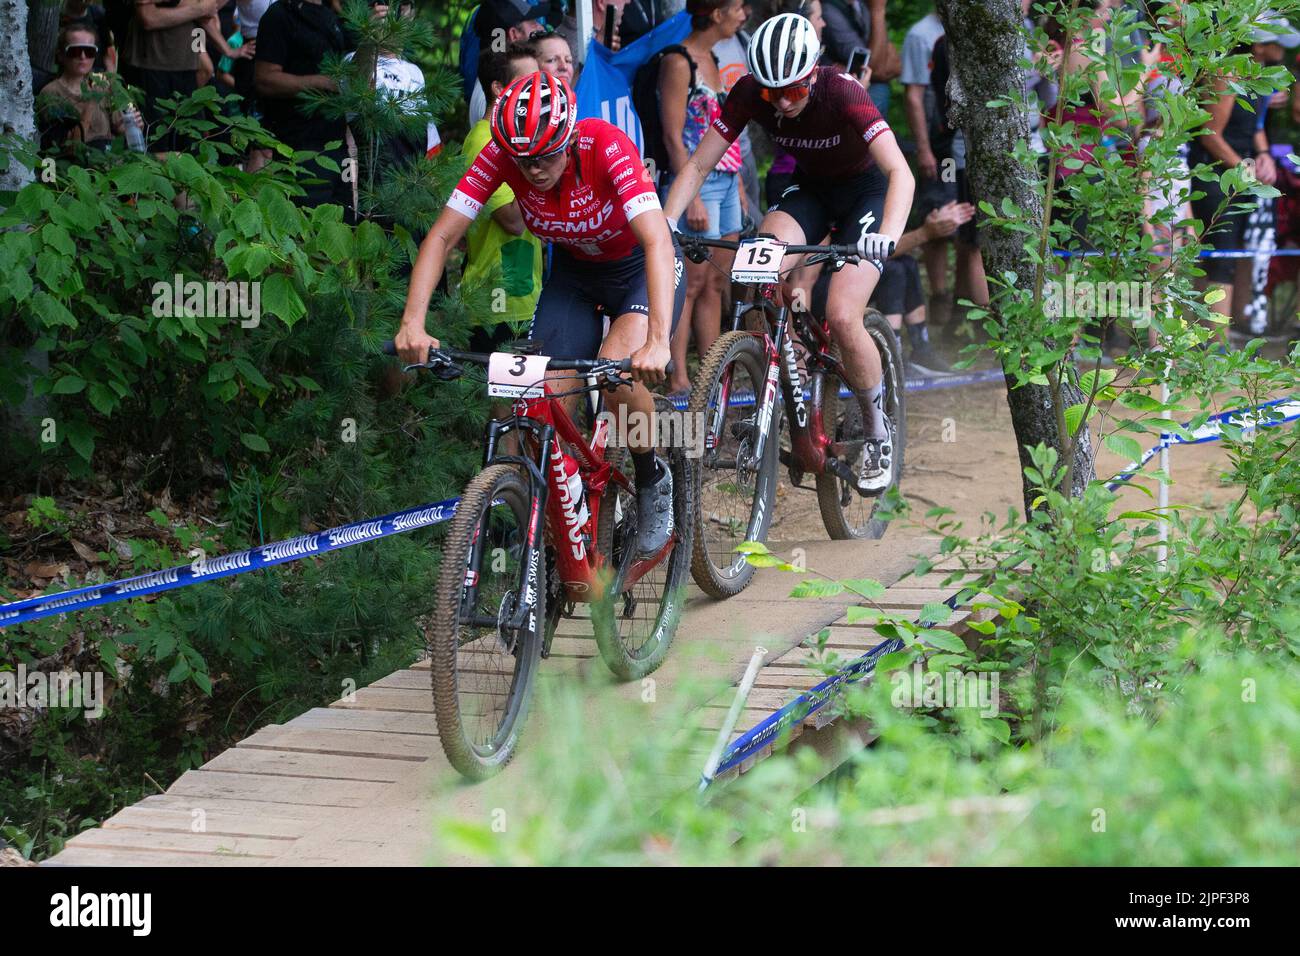 August 07, 2022: Alessandra Keller of Switzerland (3) races in the WomenÕs Cross-Country Olympic race during the 2022 Mercedes-Benz UCI Mountain Bike World Cup held at Mont-Sainte-Anne in Beaupre, Quebec, Canada. Daniel Lea/CSM Stock Photo